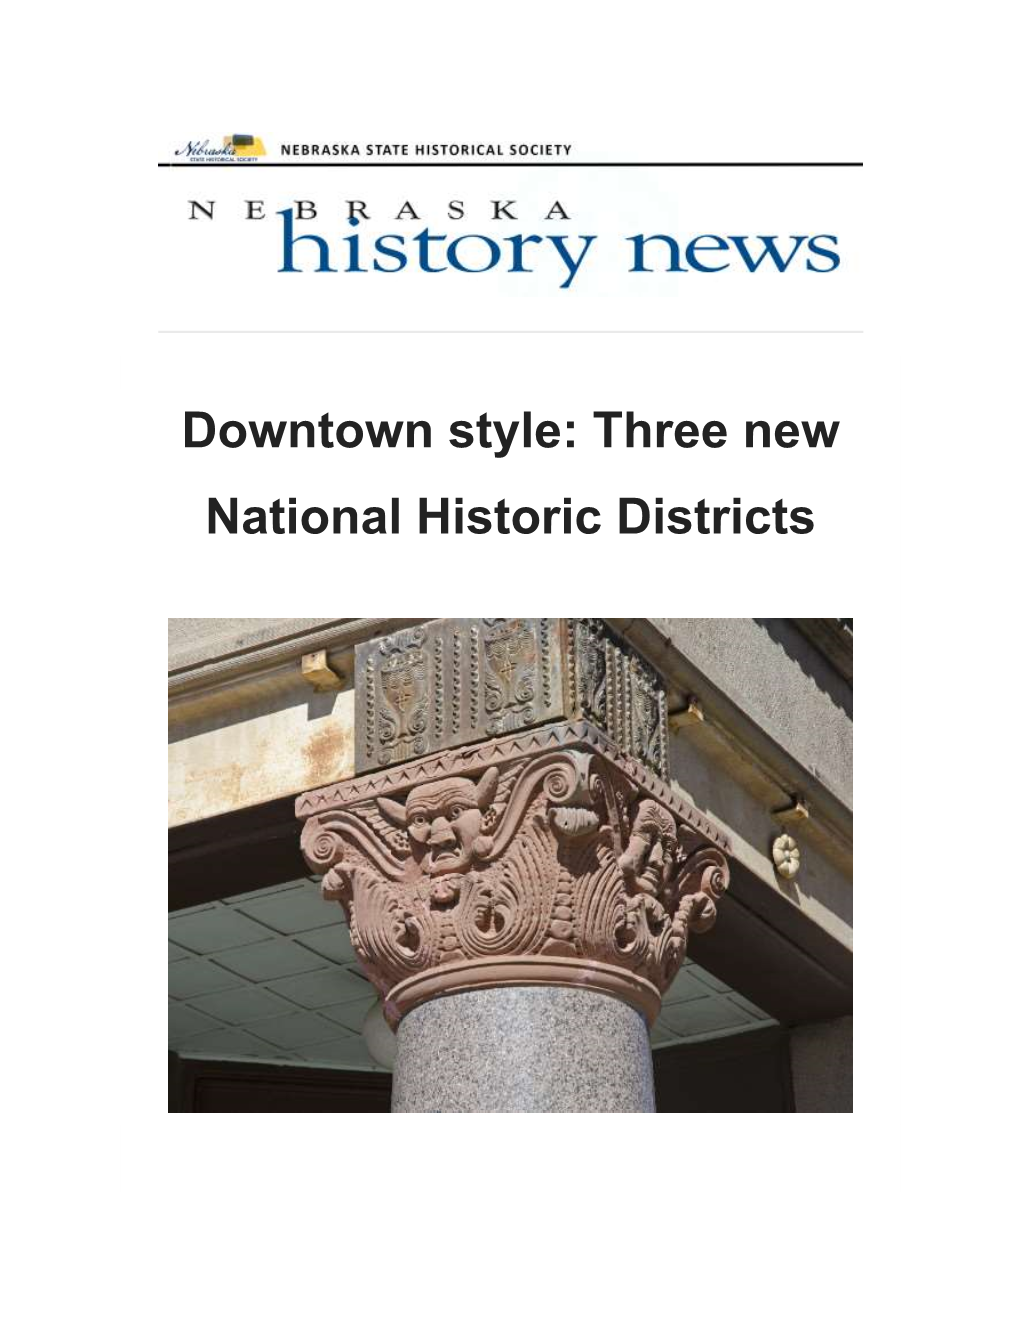 Three New National Historic Districts